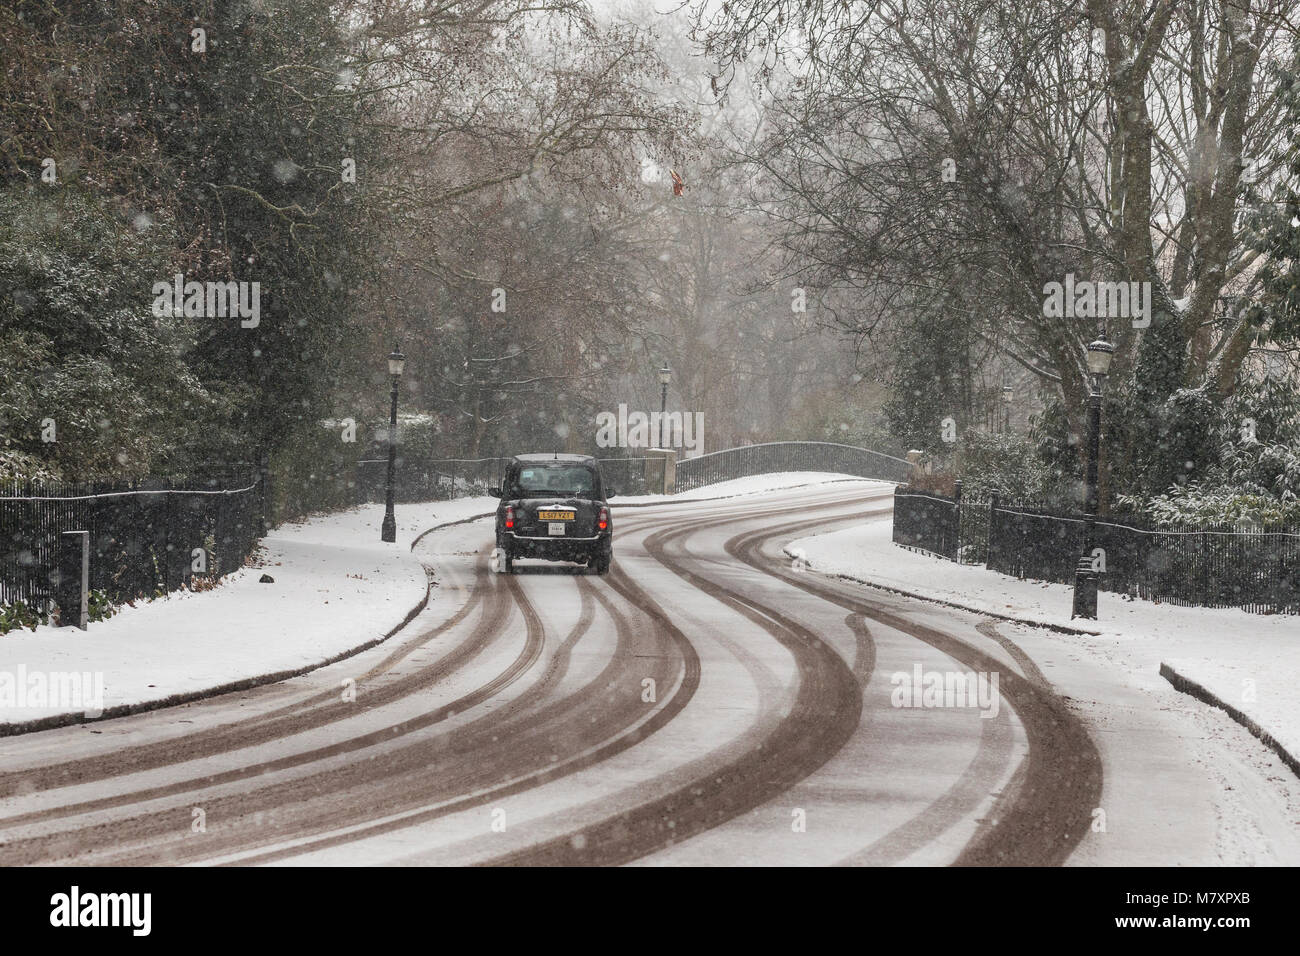 LONDON, UK – MAR 2018: Black cab driving on snow-covered road in north London Stock Photo